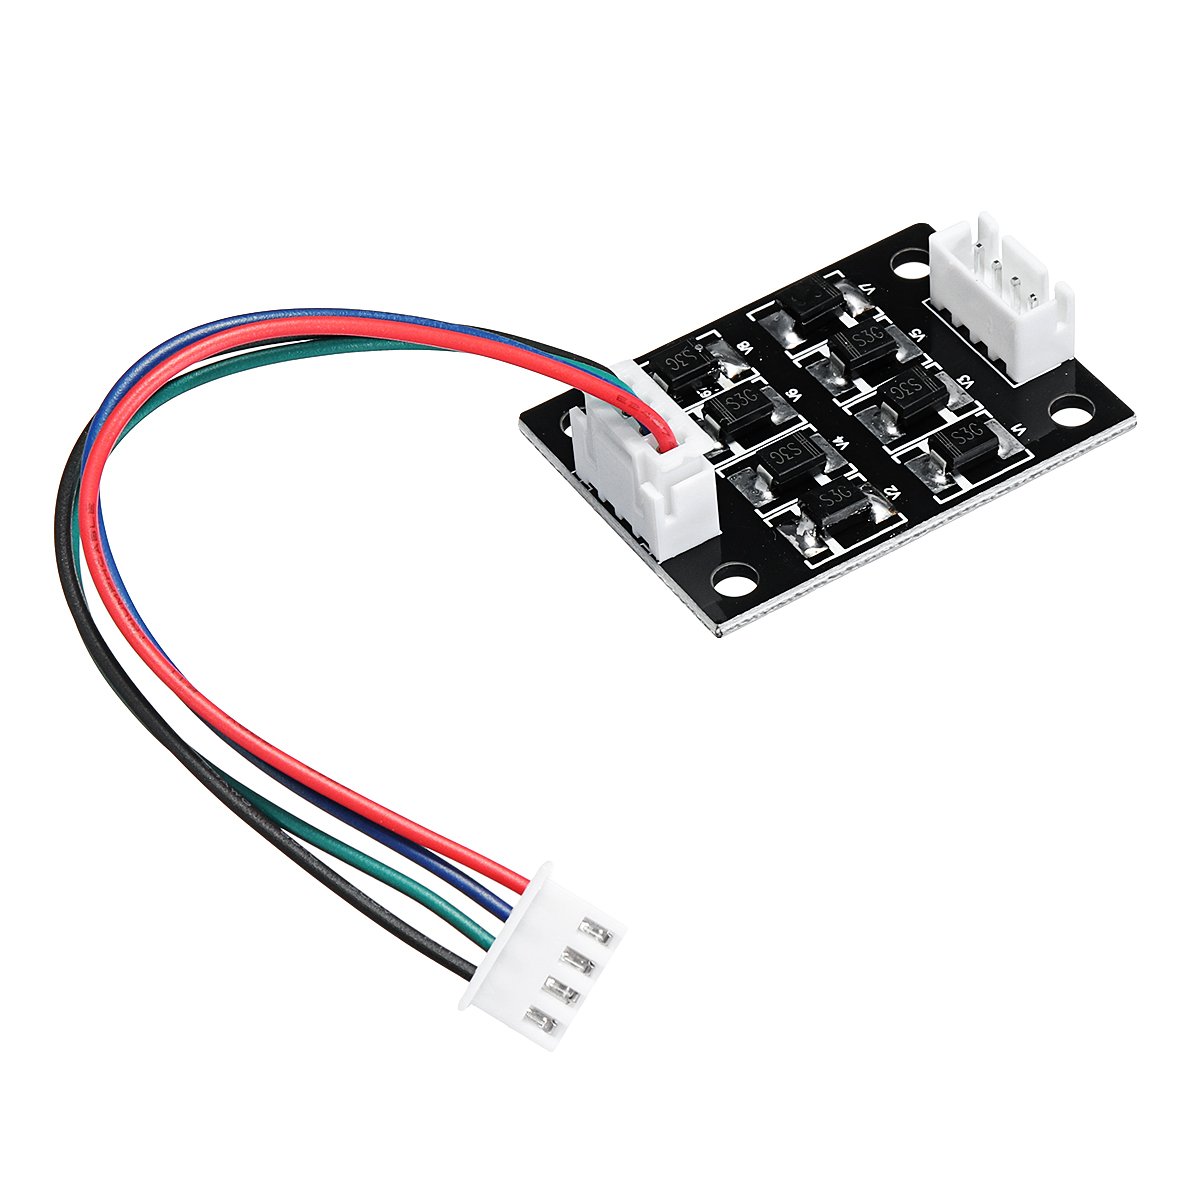 3PCS TL-Smoother Addon Module With Dupont Line For 3D Printer Stepper Motor 2